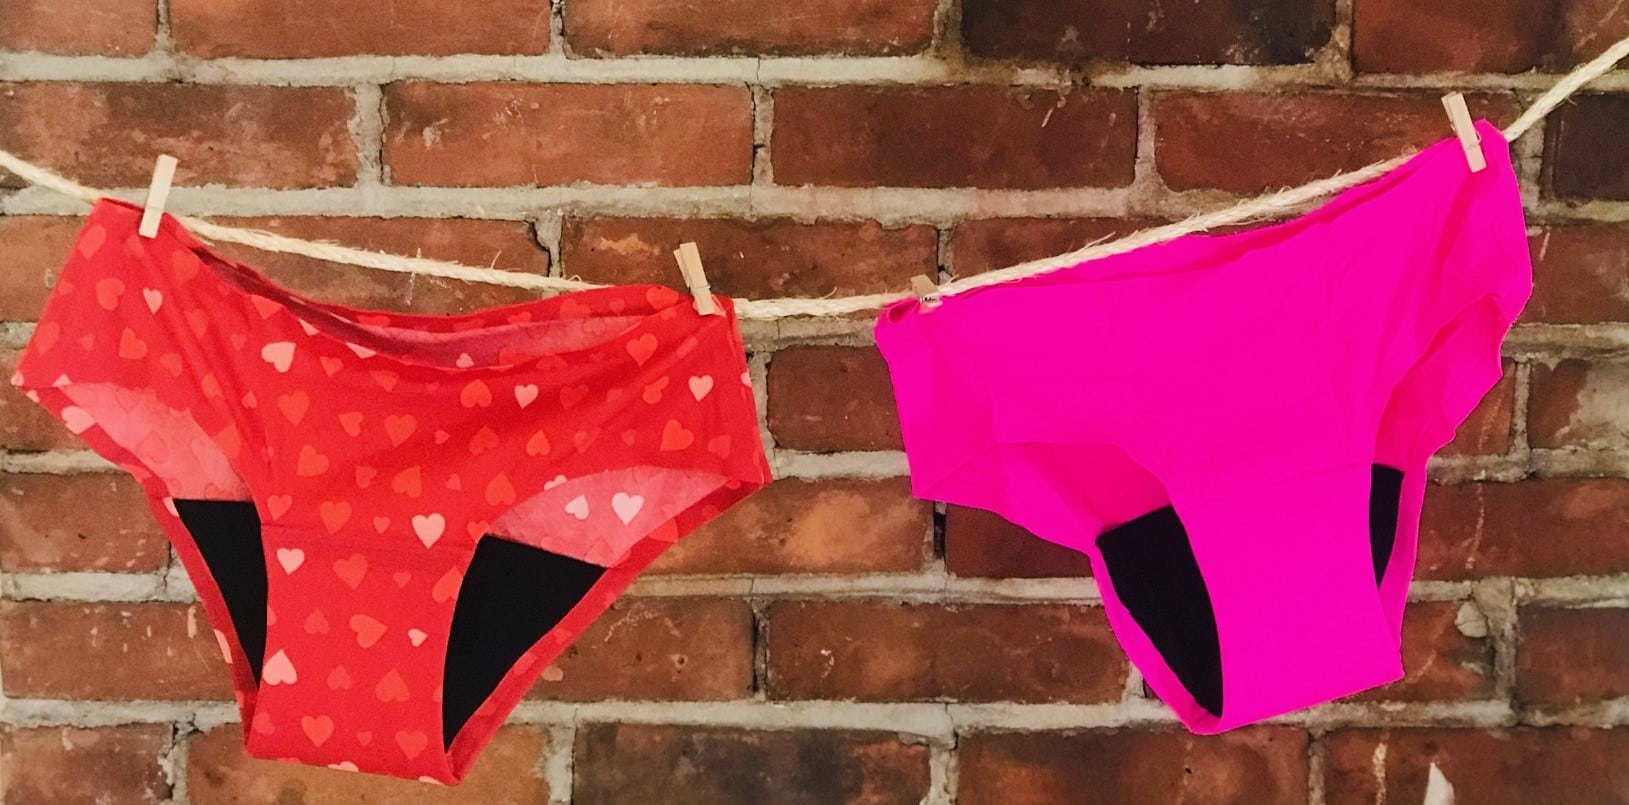 Two pairs of RubyLove period underwear hanging on a line